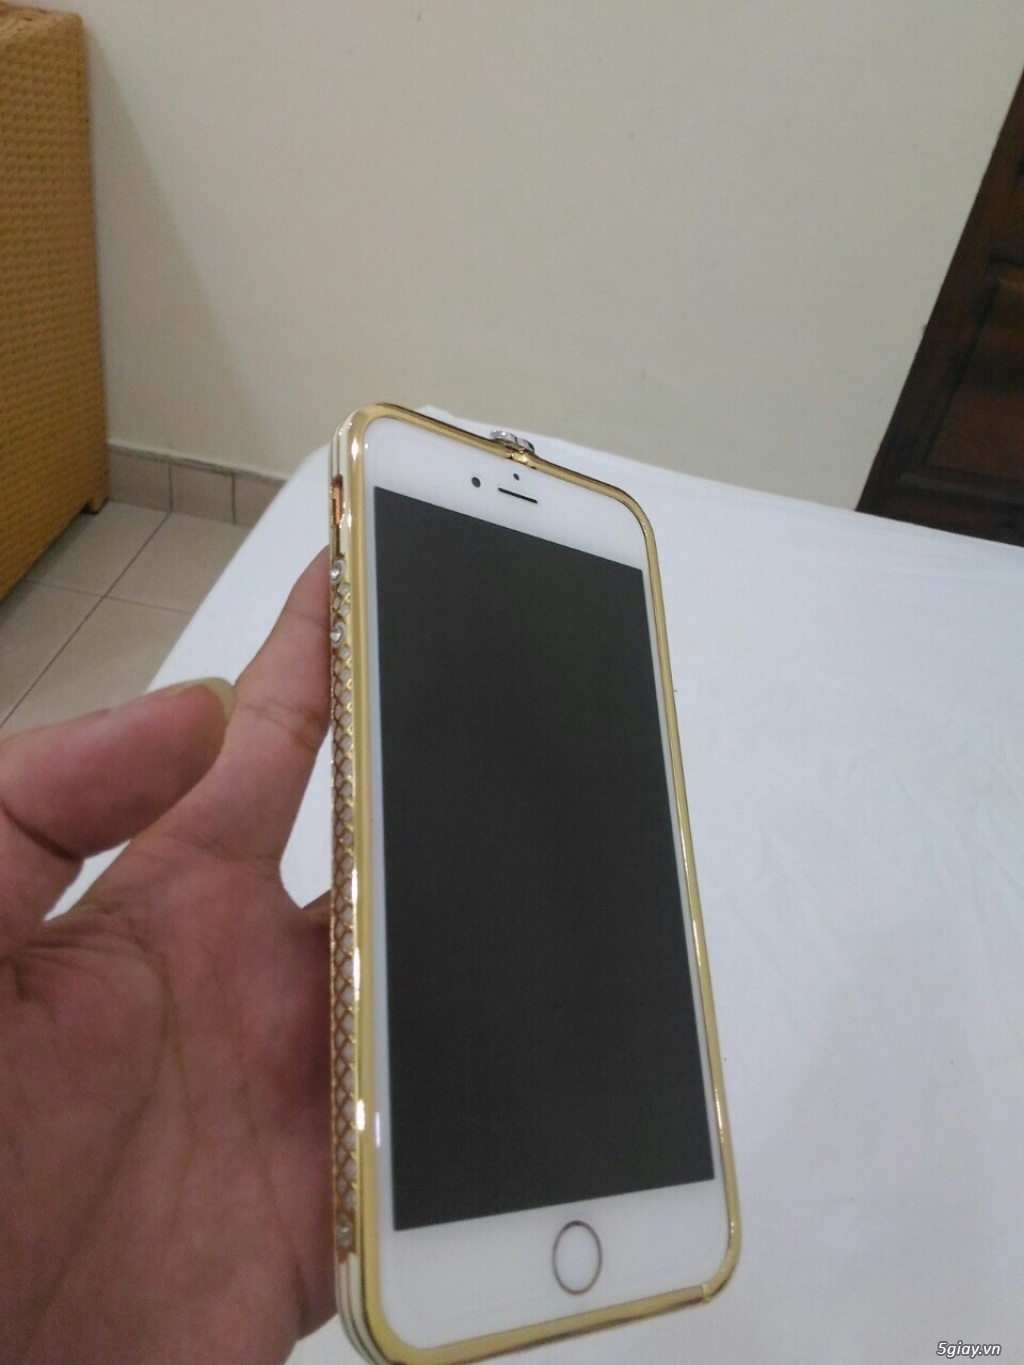 Iphone 6s Plus 128gb rosa gold like new